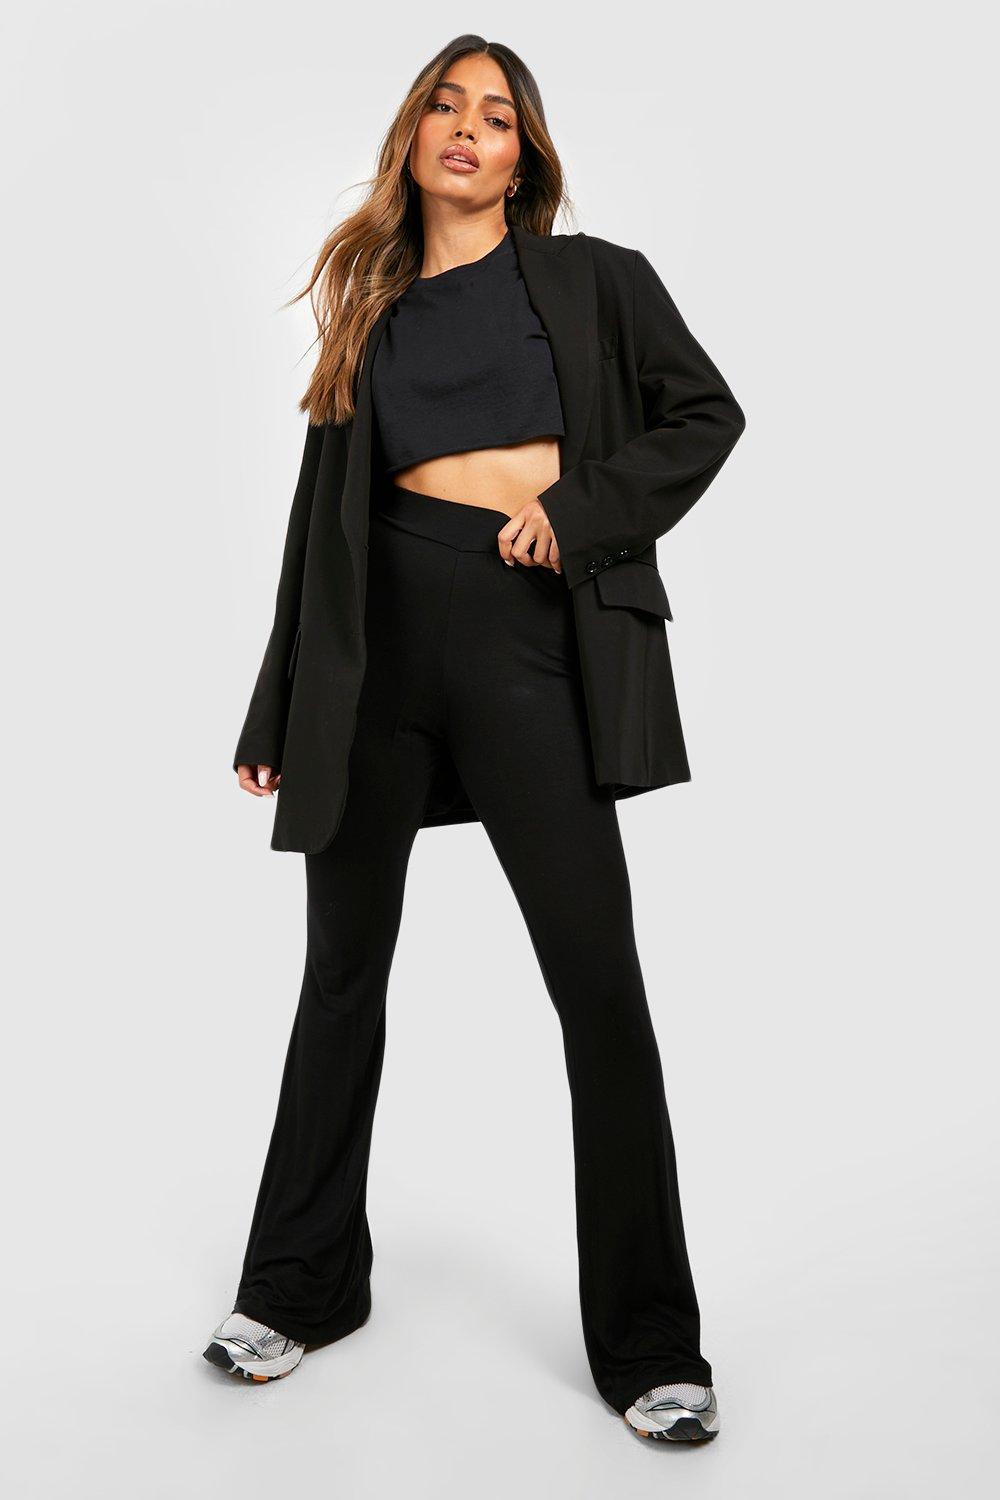 black fit and flare pants